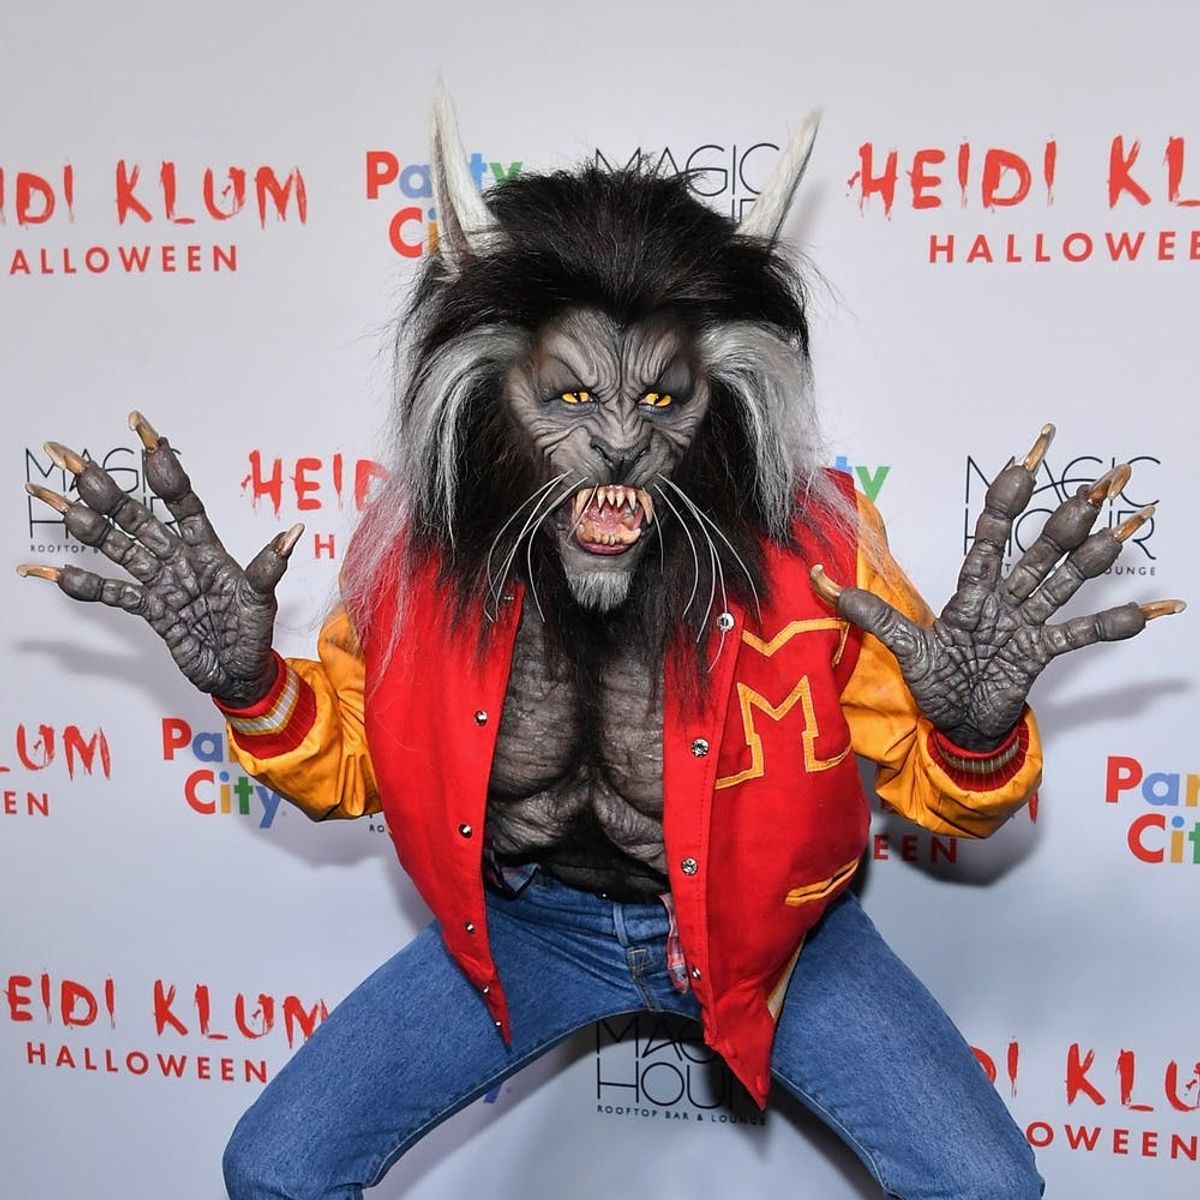 Every Amazing Celebrity Costume from Halloween 2017… So Far